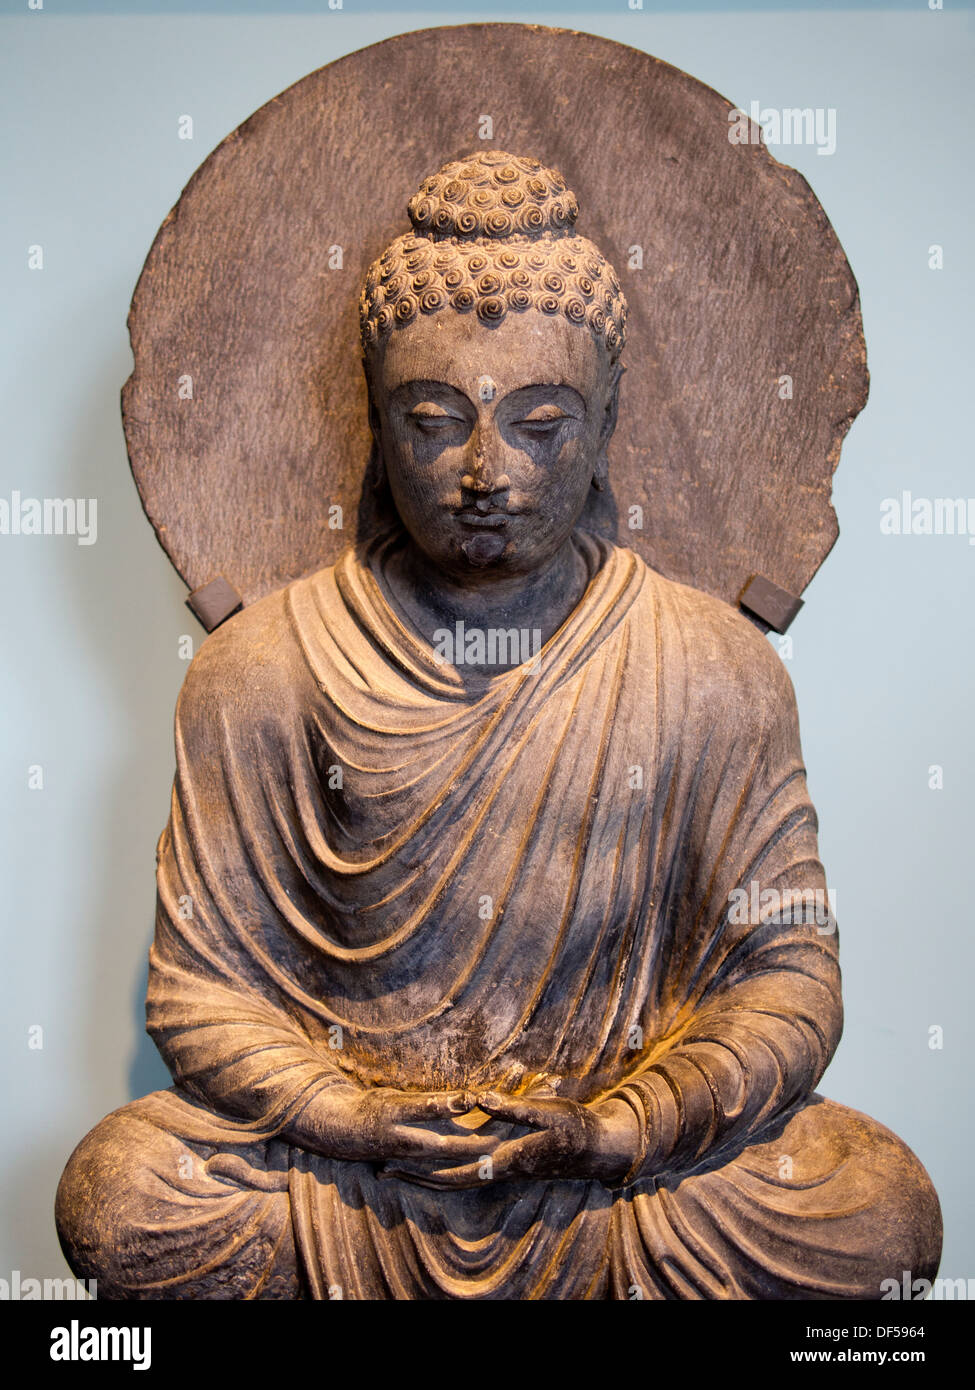 The Victoria and Albert Museum, London - Buddha from ancient Gandhara seated in meditation Stock Photo